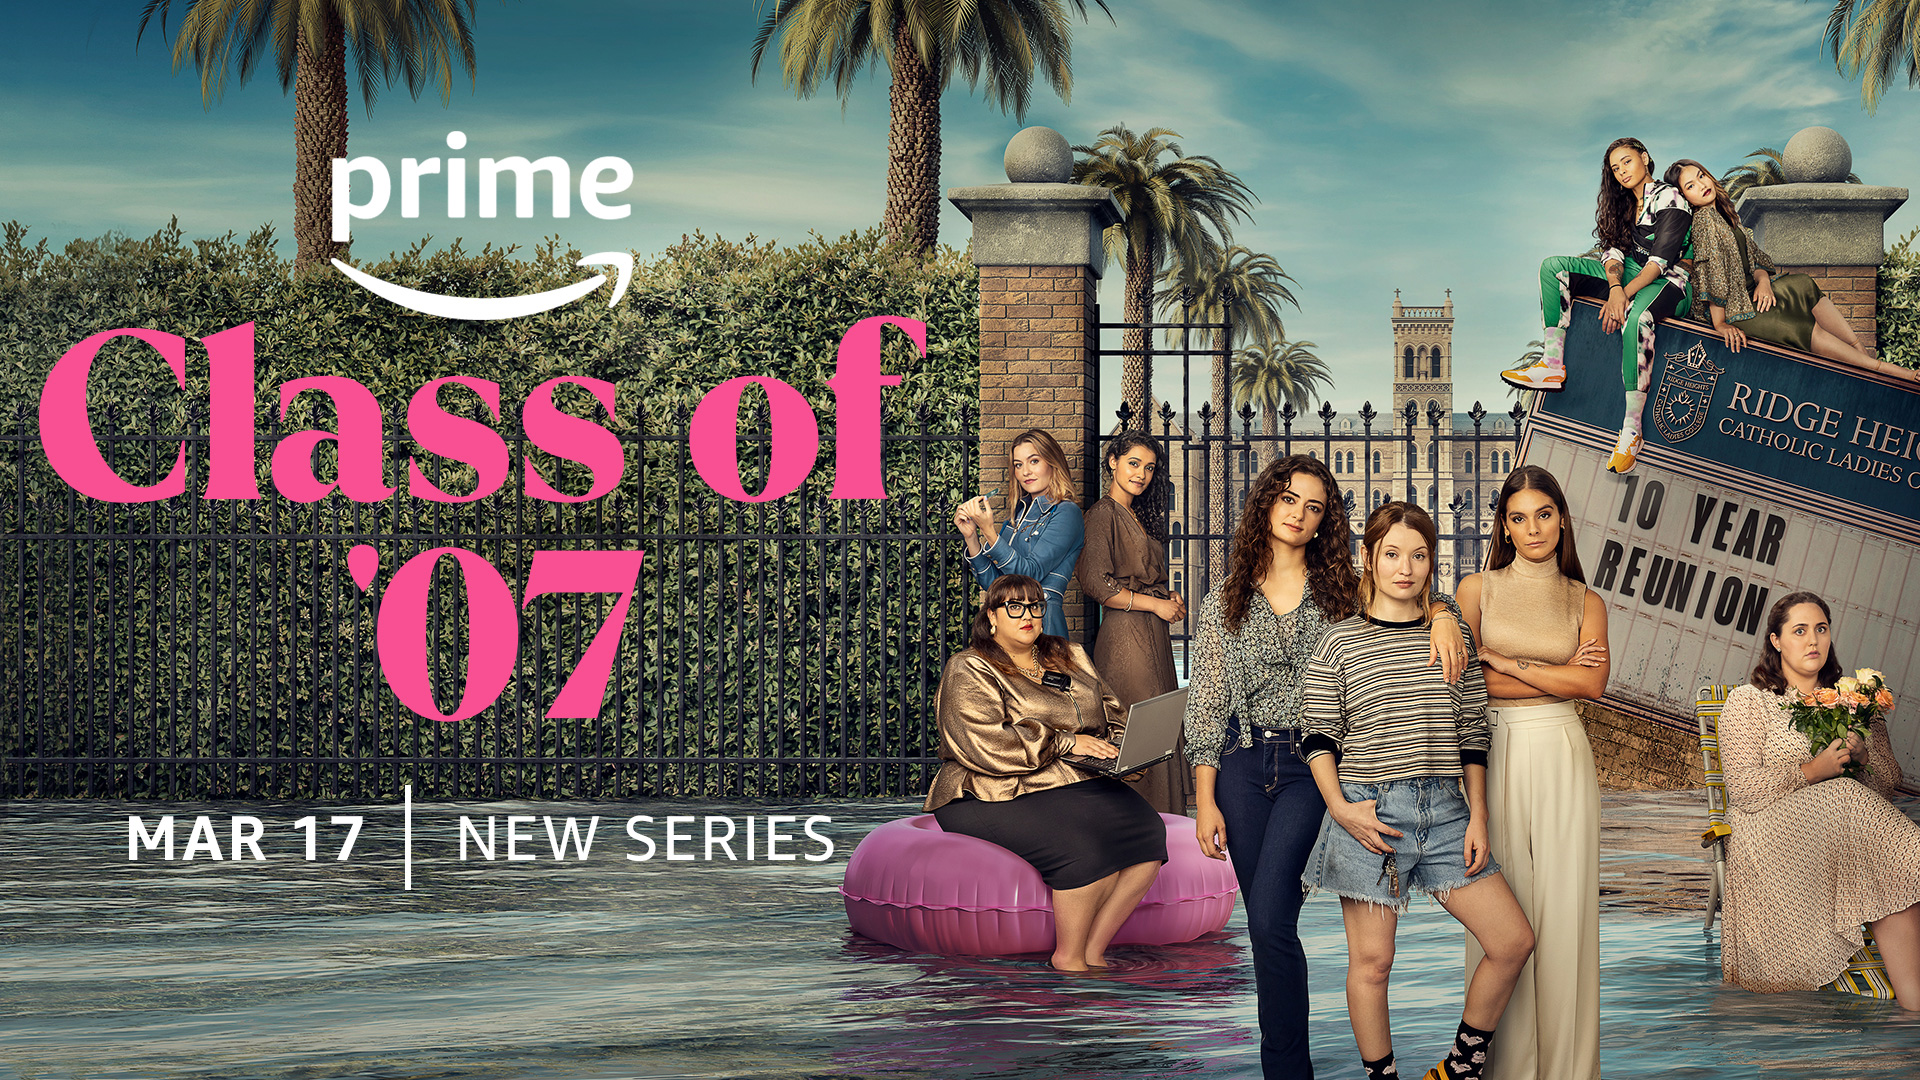 Class of '07 - Poster [credit: Copyright Amazon Studios; courtesy of Prime Video]